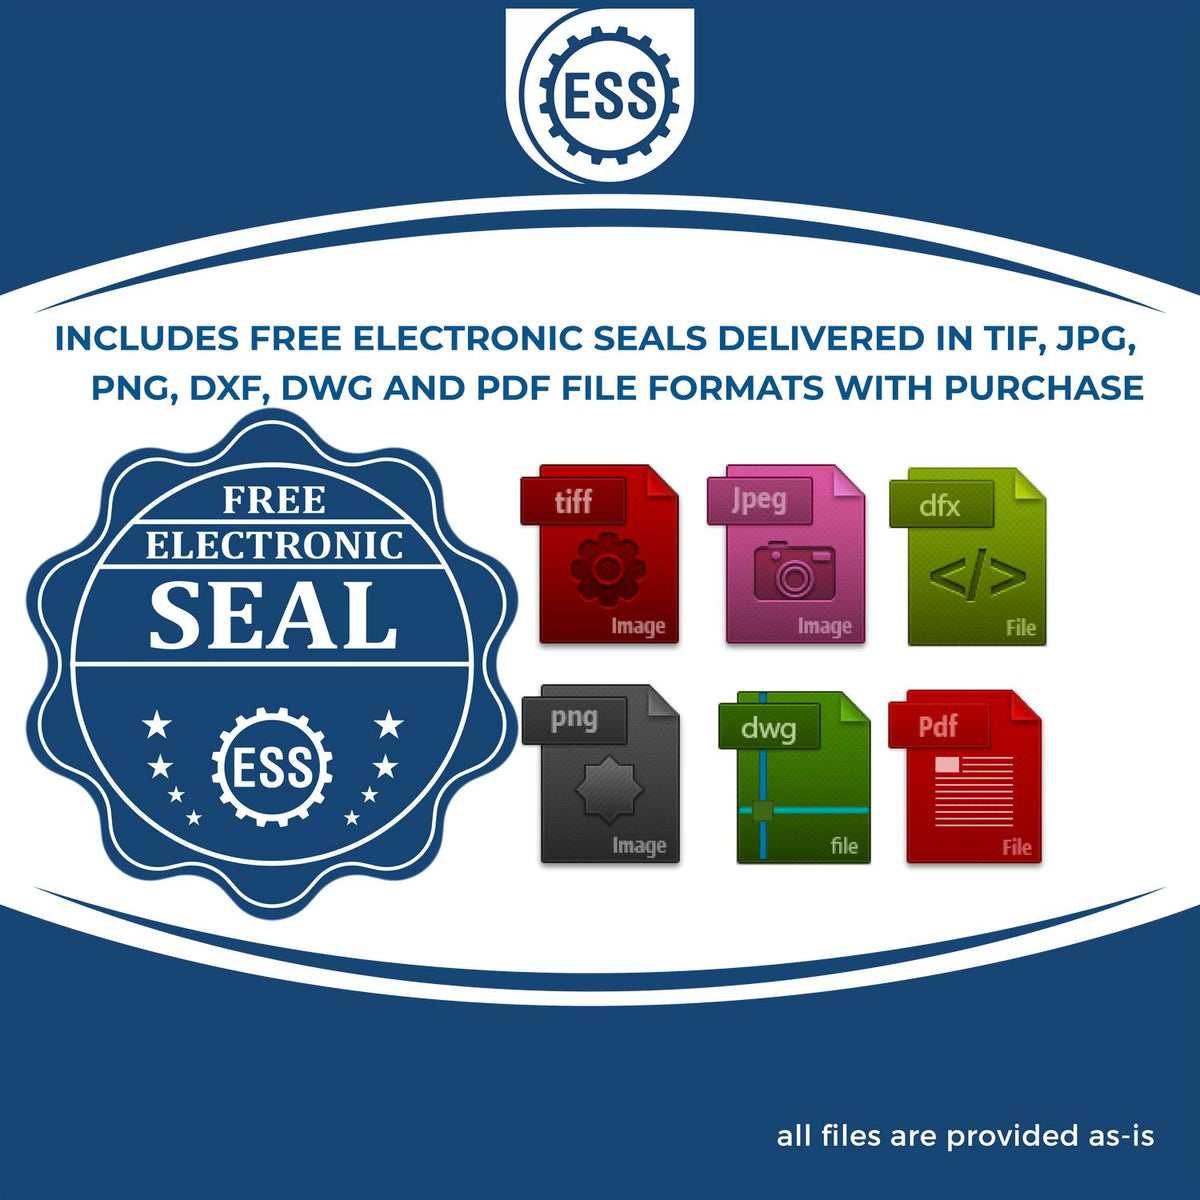 An infographic for the free electronic seal for the Premium MaxLight Pre-Inked Nebraska Landscape Architectural Stamp illustrating the different file type icons such as DXF, DWG, TIF, JPG and PNG.